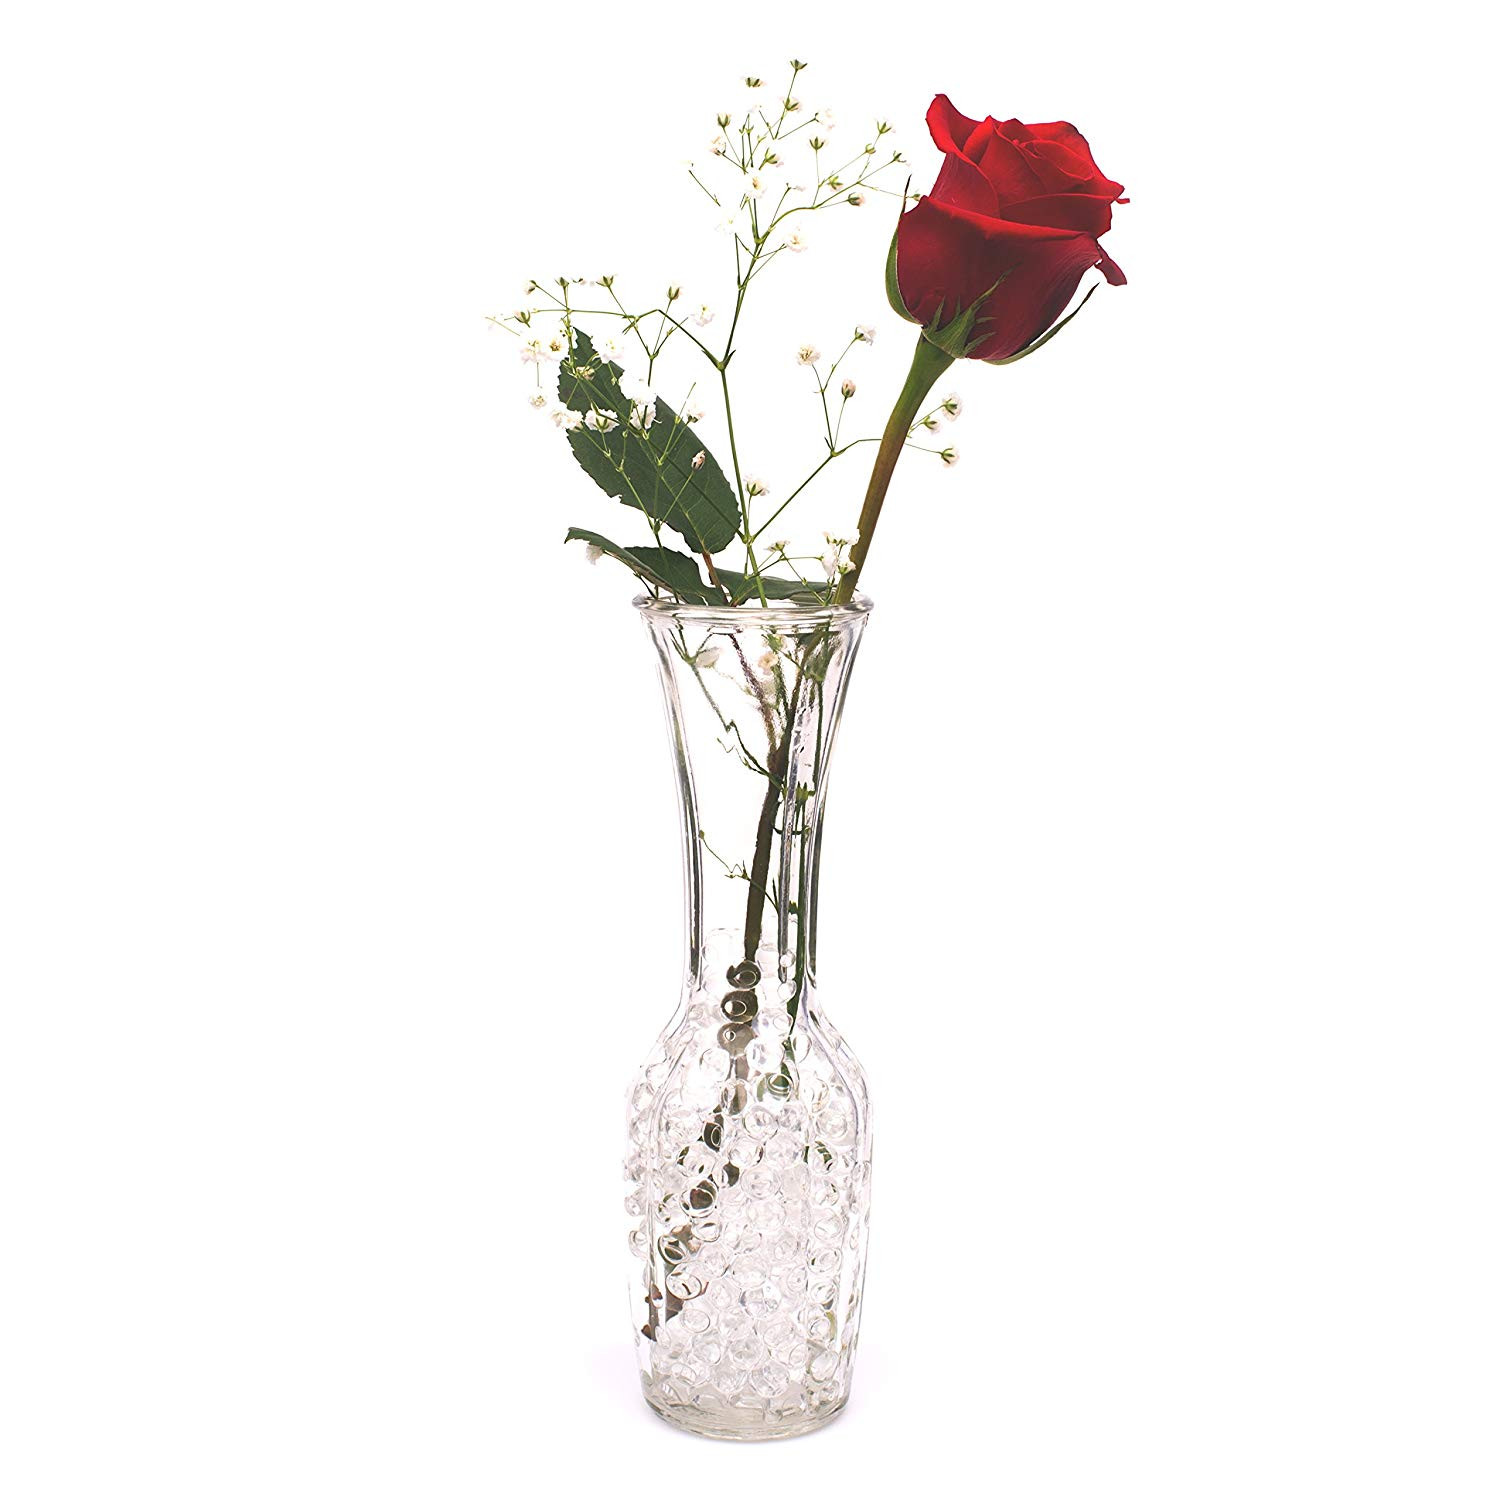 16 Popular Vase Fillers for Wedding Centerpieces 2024 free download vase fillers for wedding centerpieces of amazon com magic beadz clear jelly water beads transparent gel with regard to amazon com magic beadz clear jelly water beads transparent gel pearls v